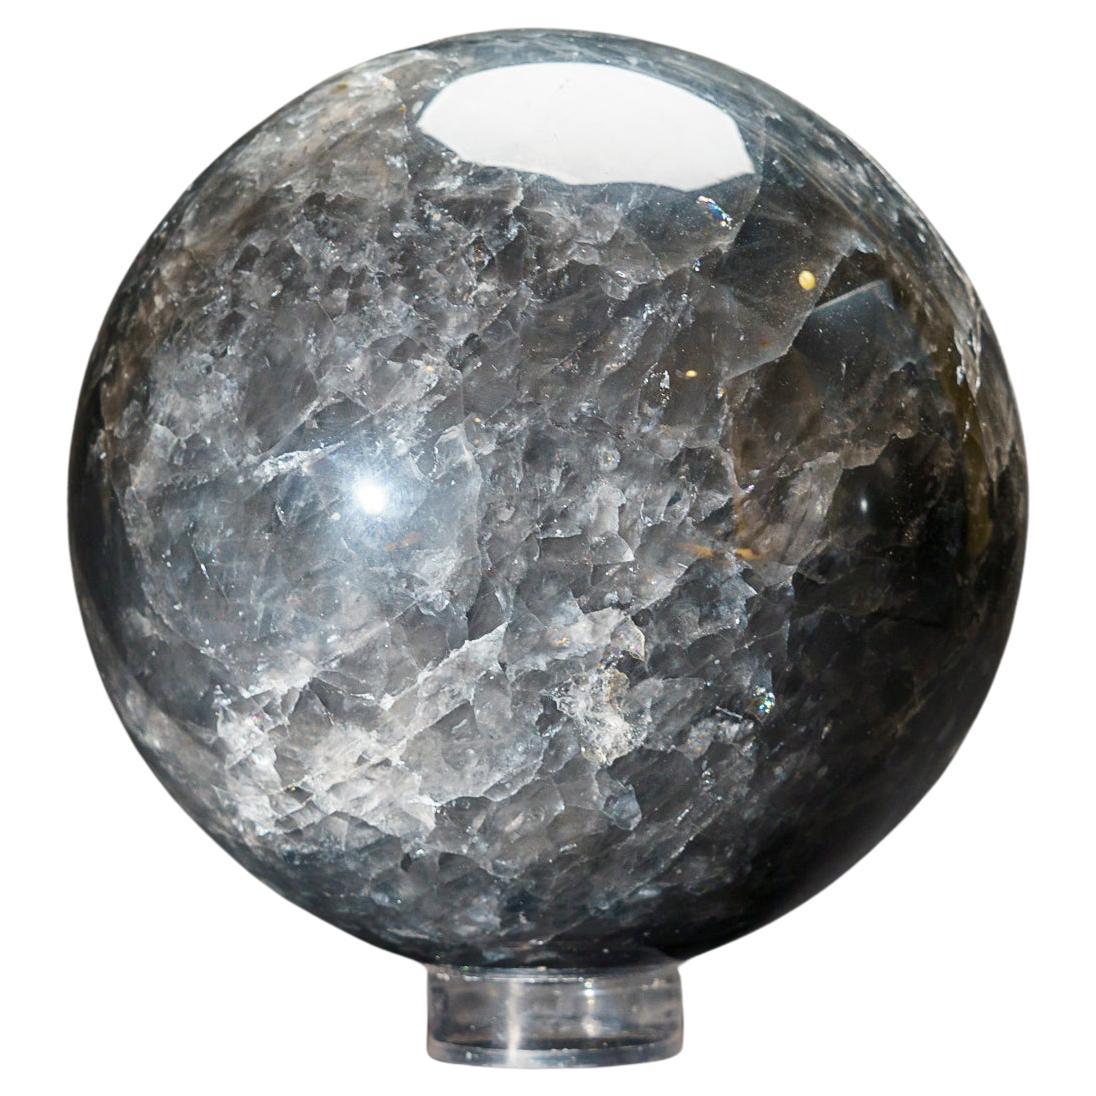 Genuine Polished Blue Quartz Sphere From Brazil (7", 13 lbs) For Sale